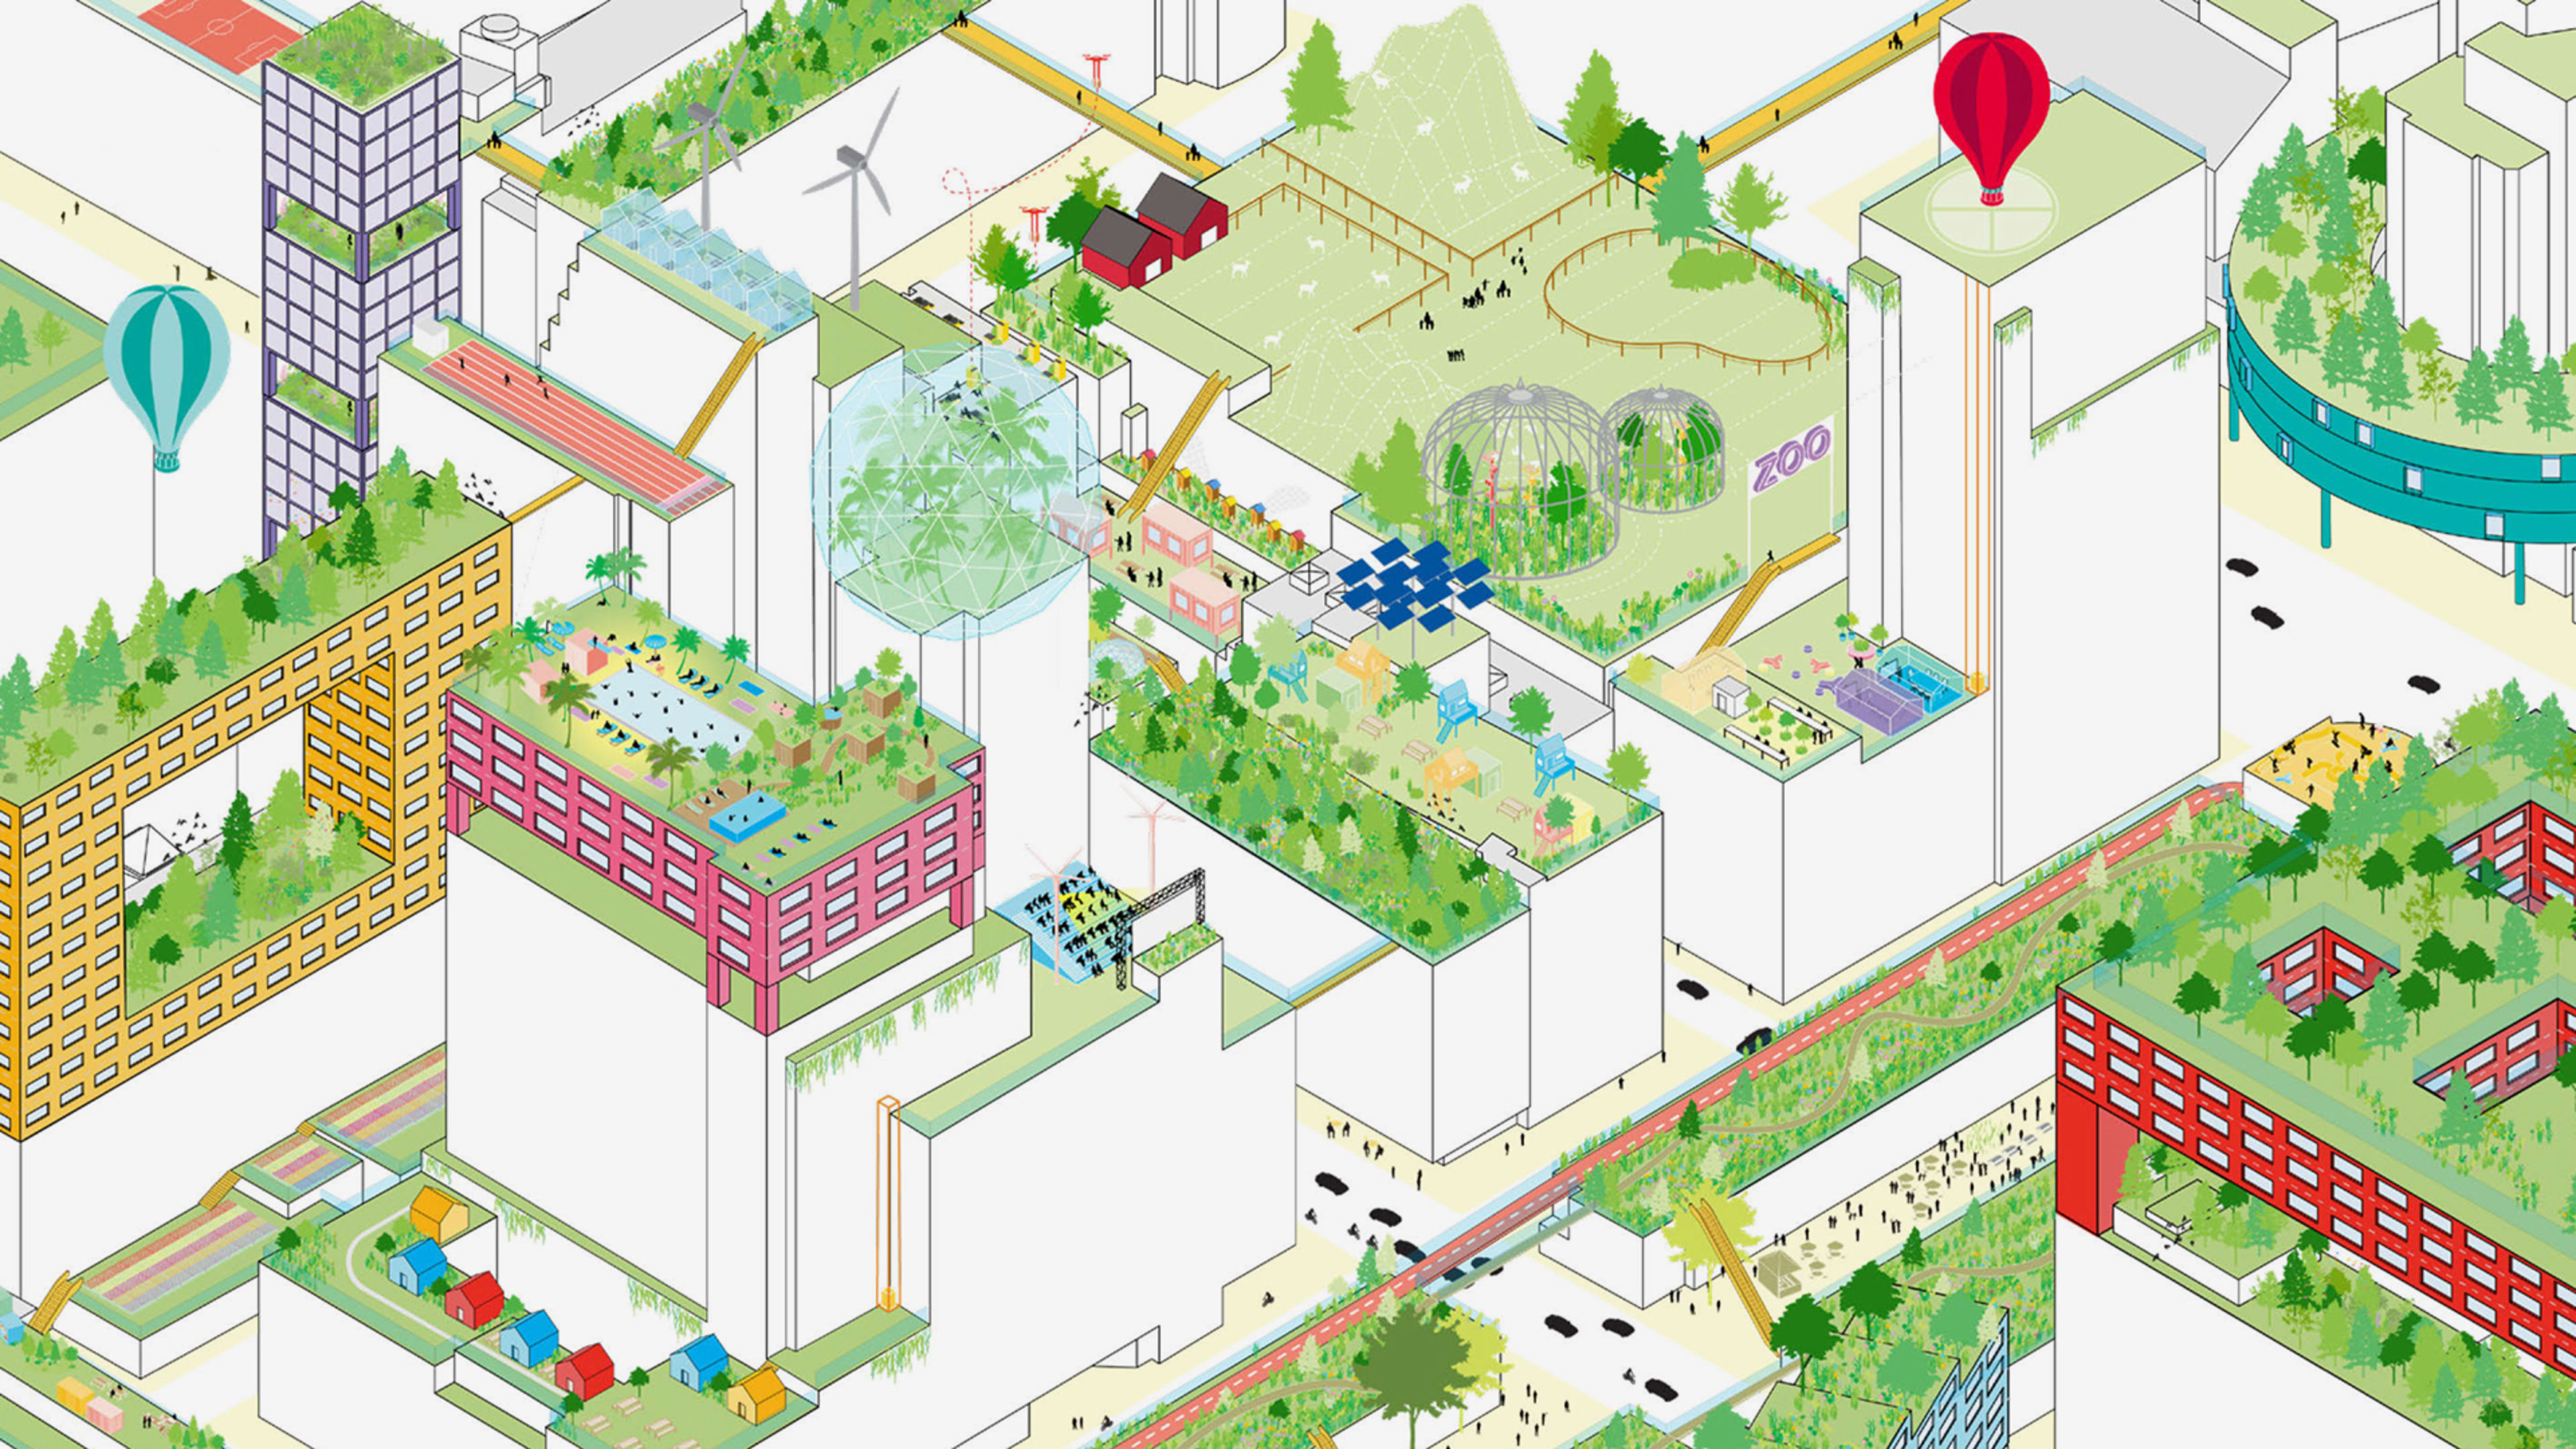 100 ways to make better use of urban rooftops, from parks to tiny homes